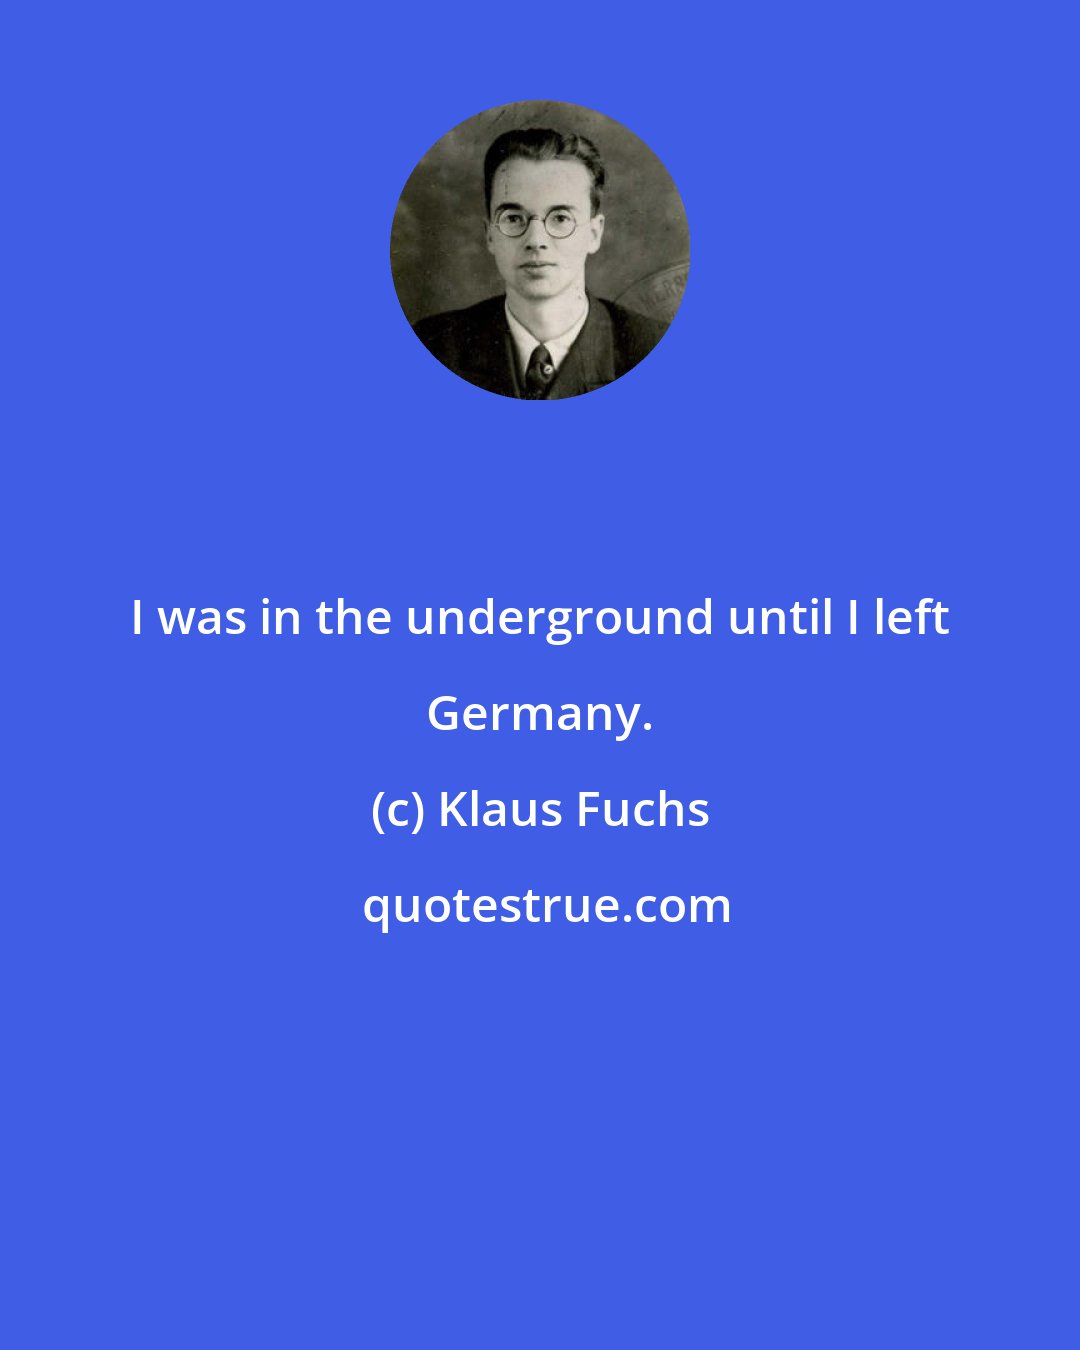 Klaus Fuchs: I was in the underground until I left Germany.